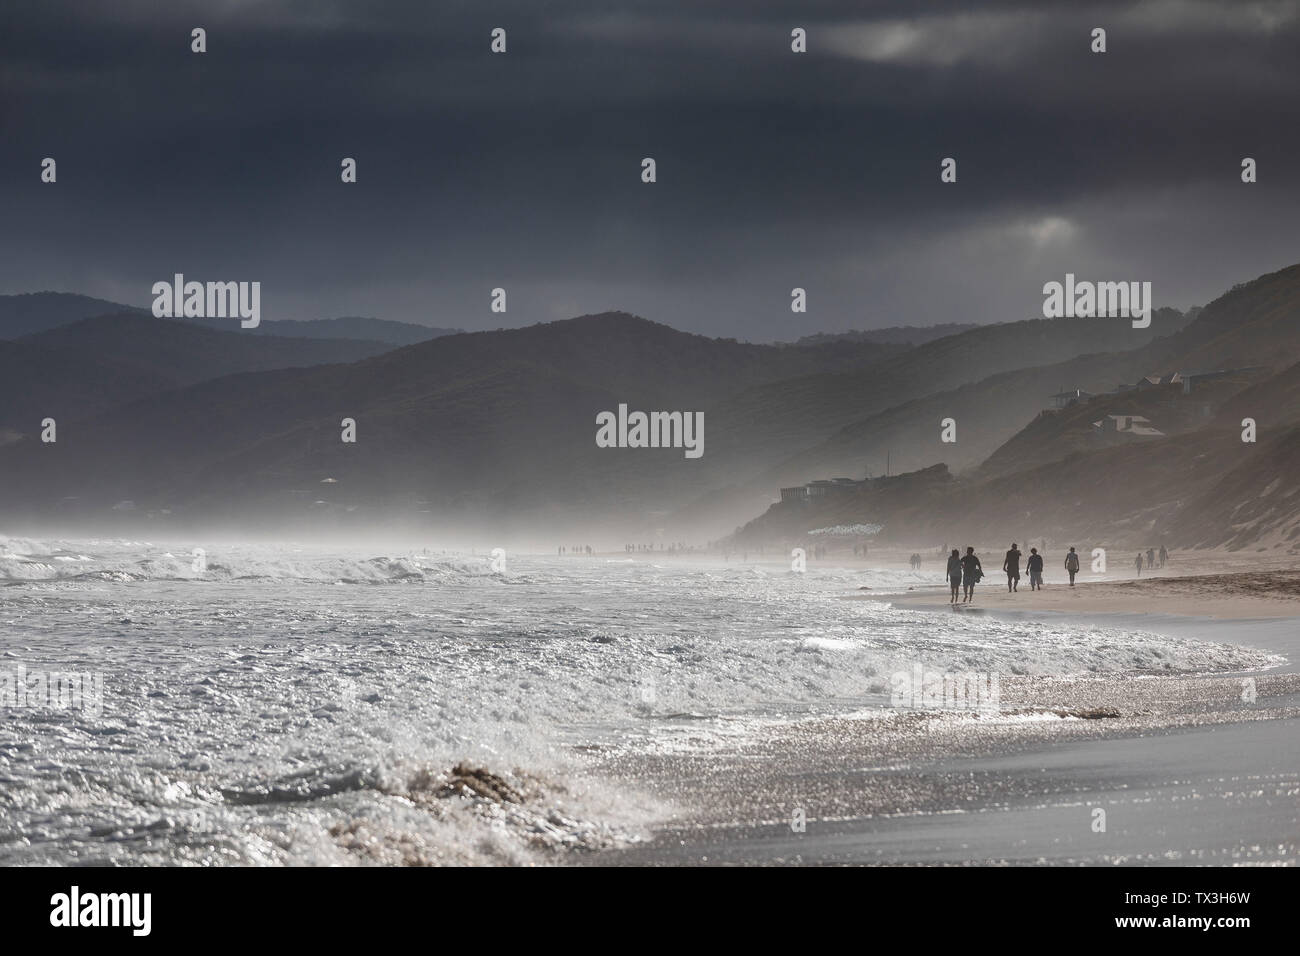 Ominous clouds over silhouetted people walking on ocean beach, Aireys Inlet, Victoria, Australia Stock Photo